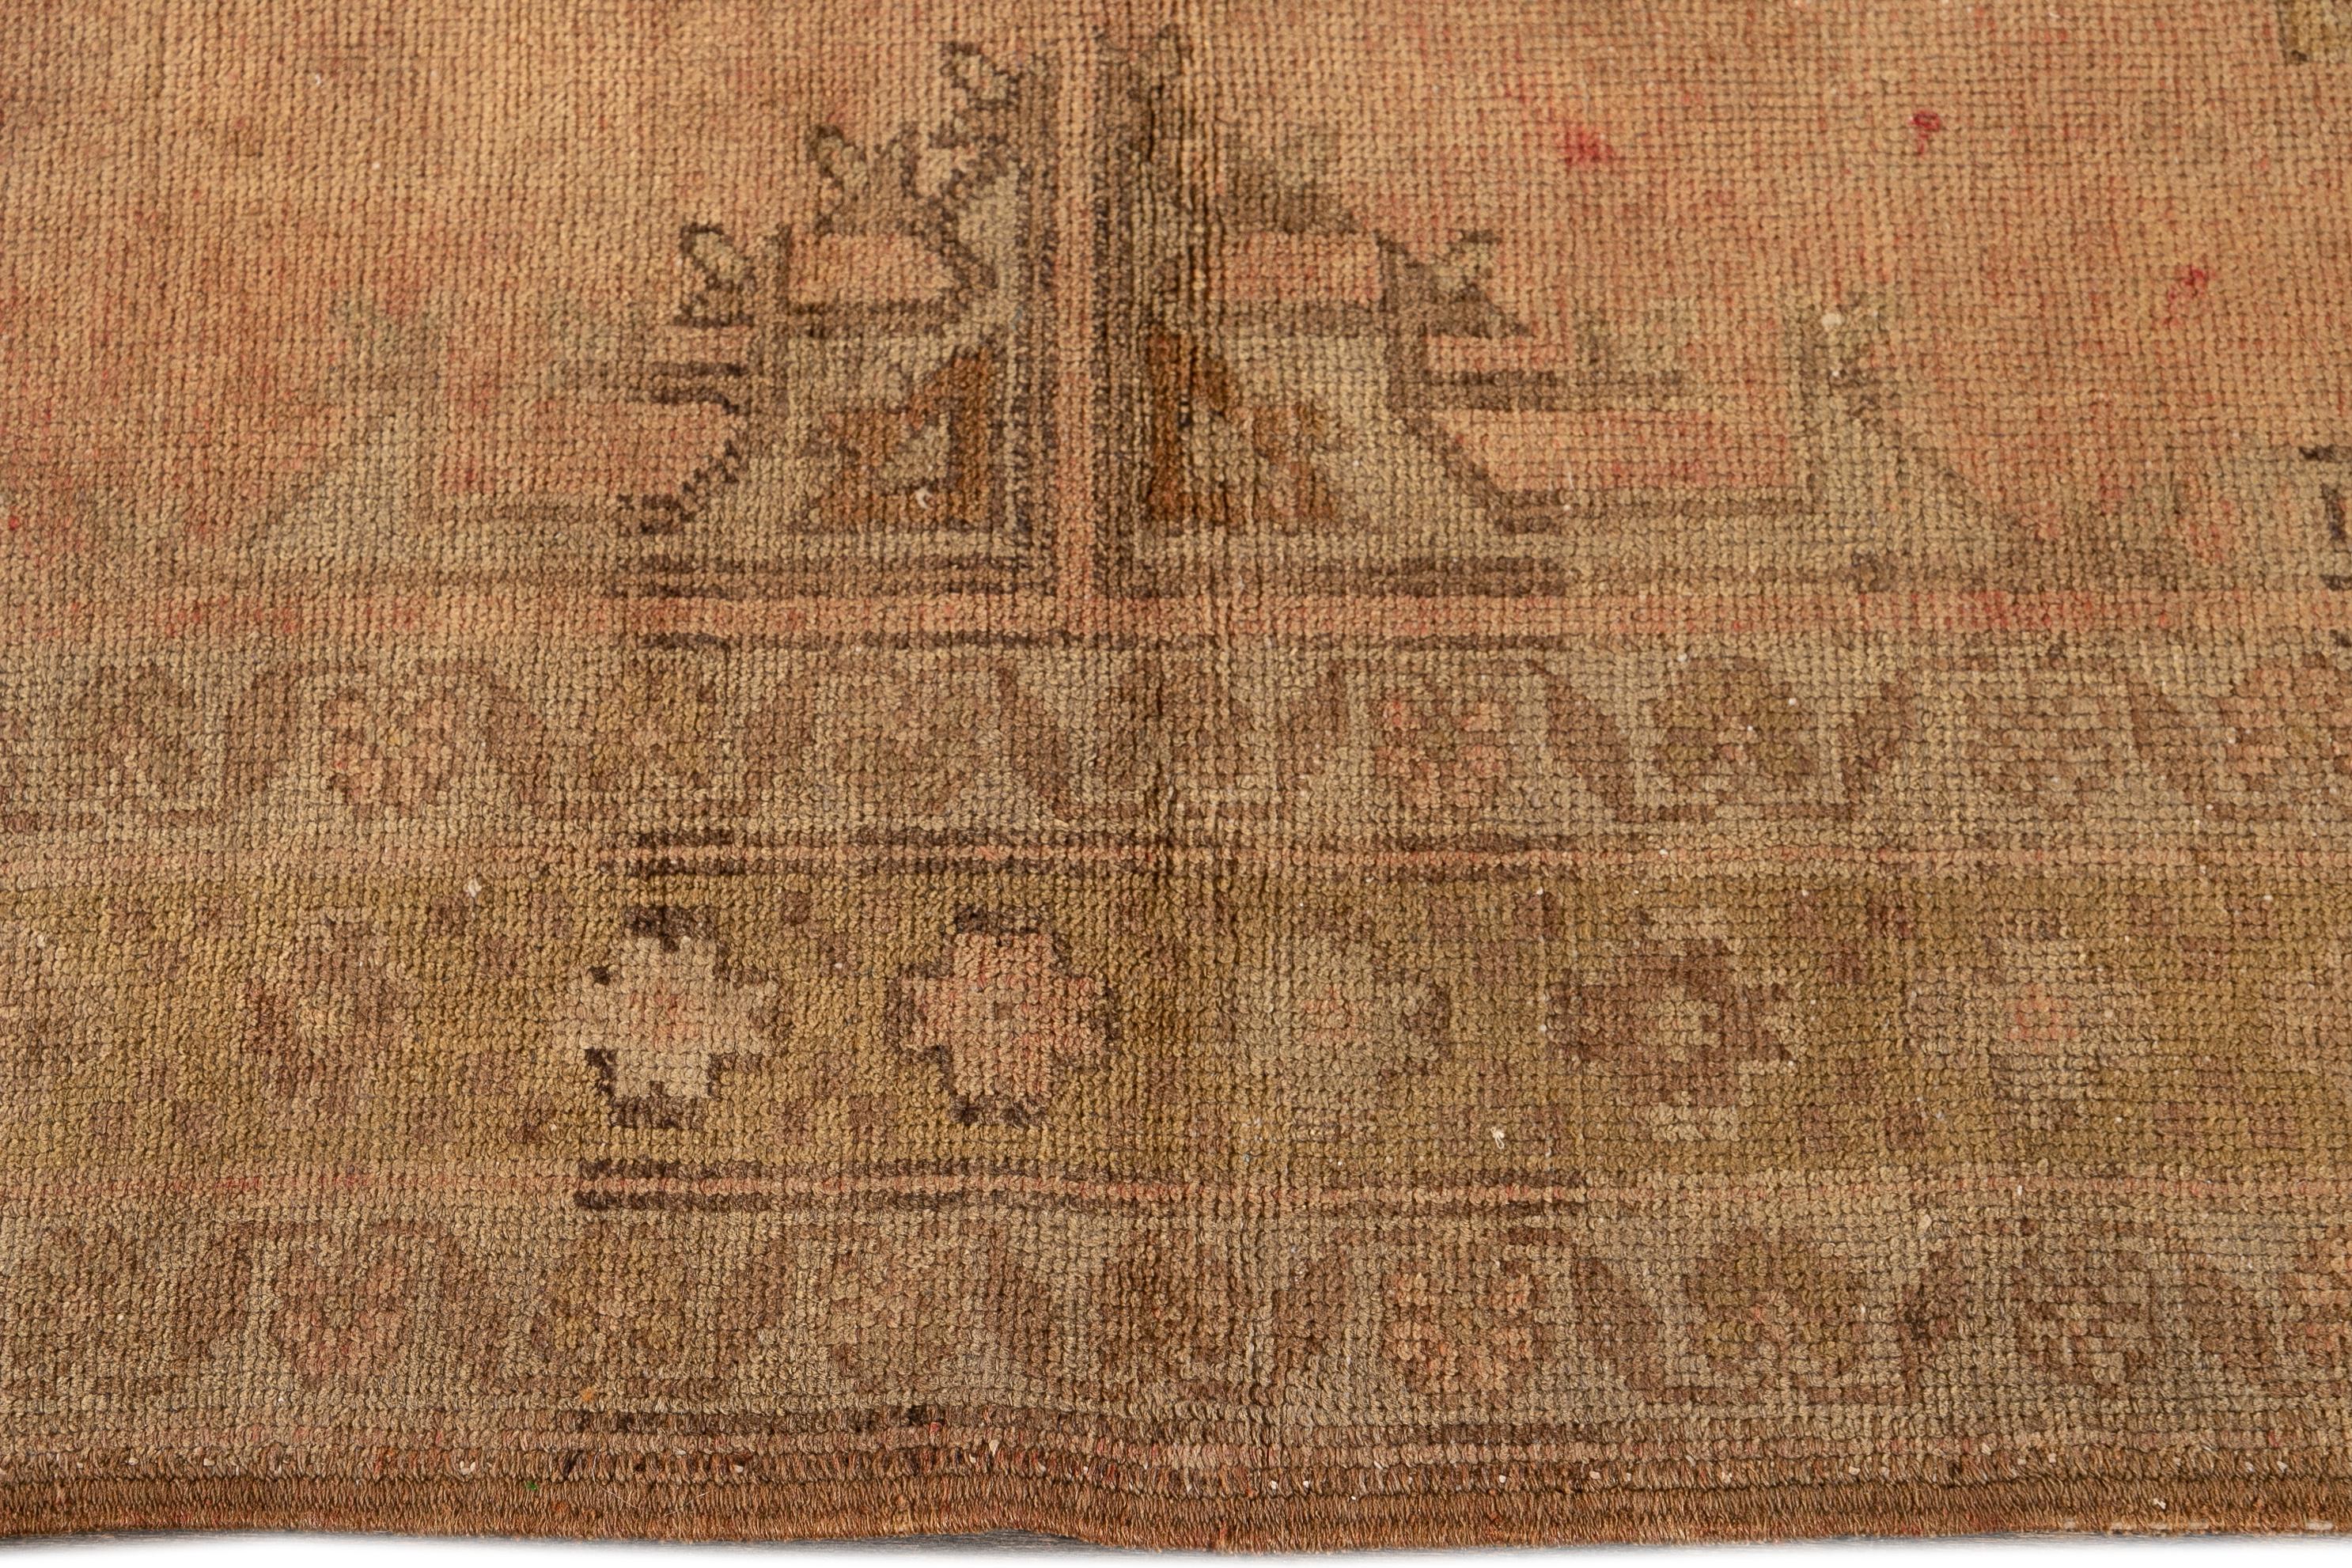 Vintage Mid-20th Century Khotan Rug In Good Condition For Sale In Norwalk, CT